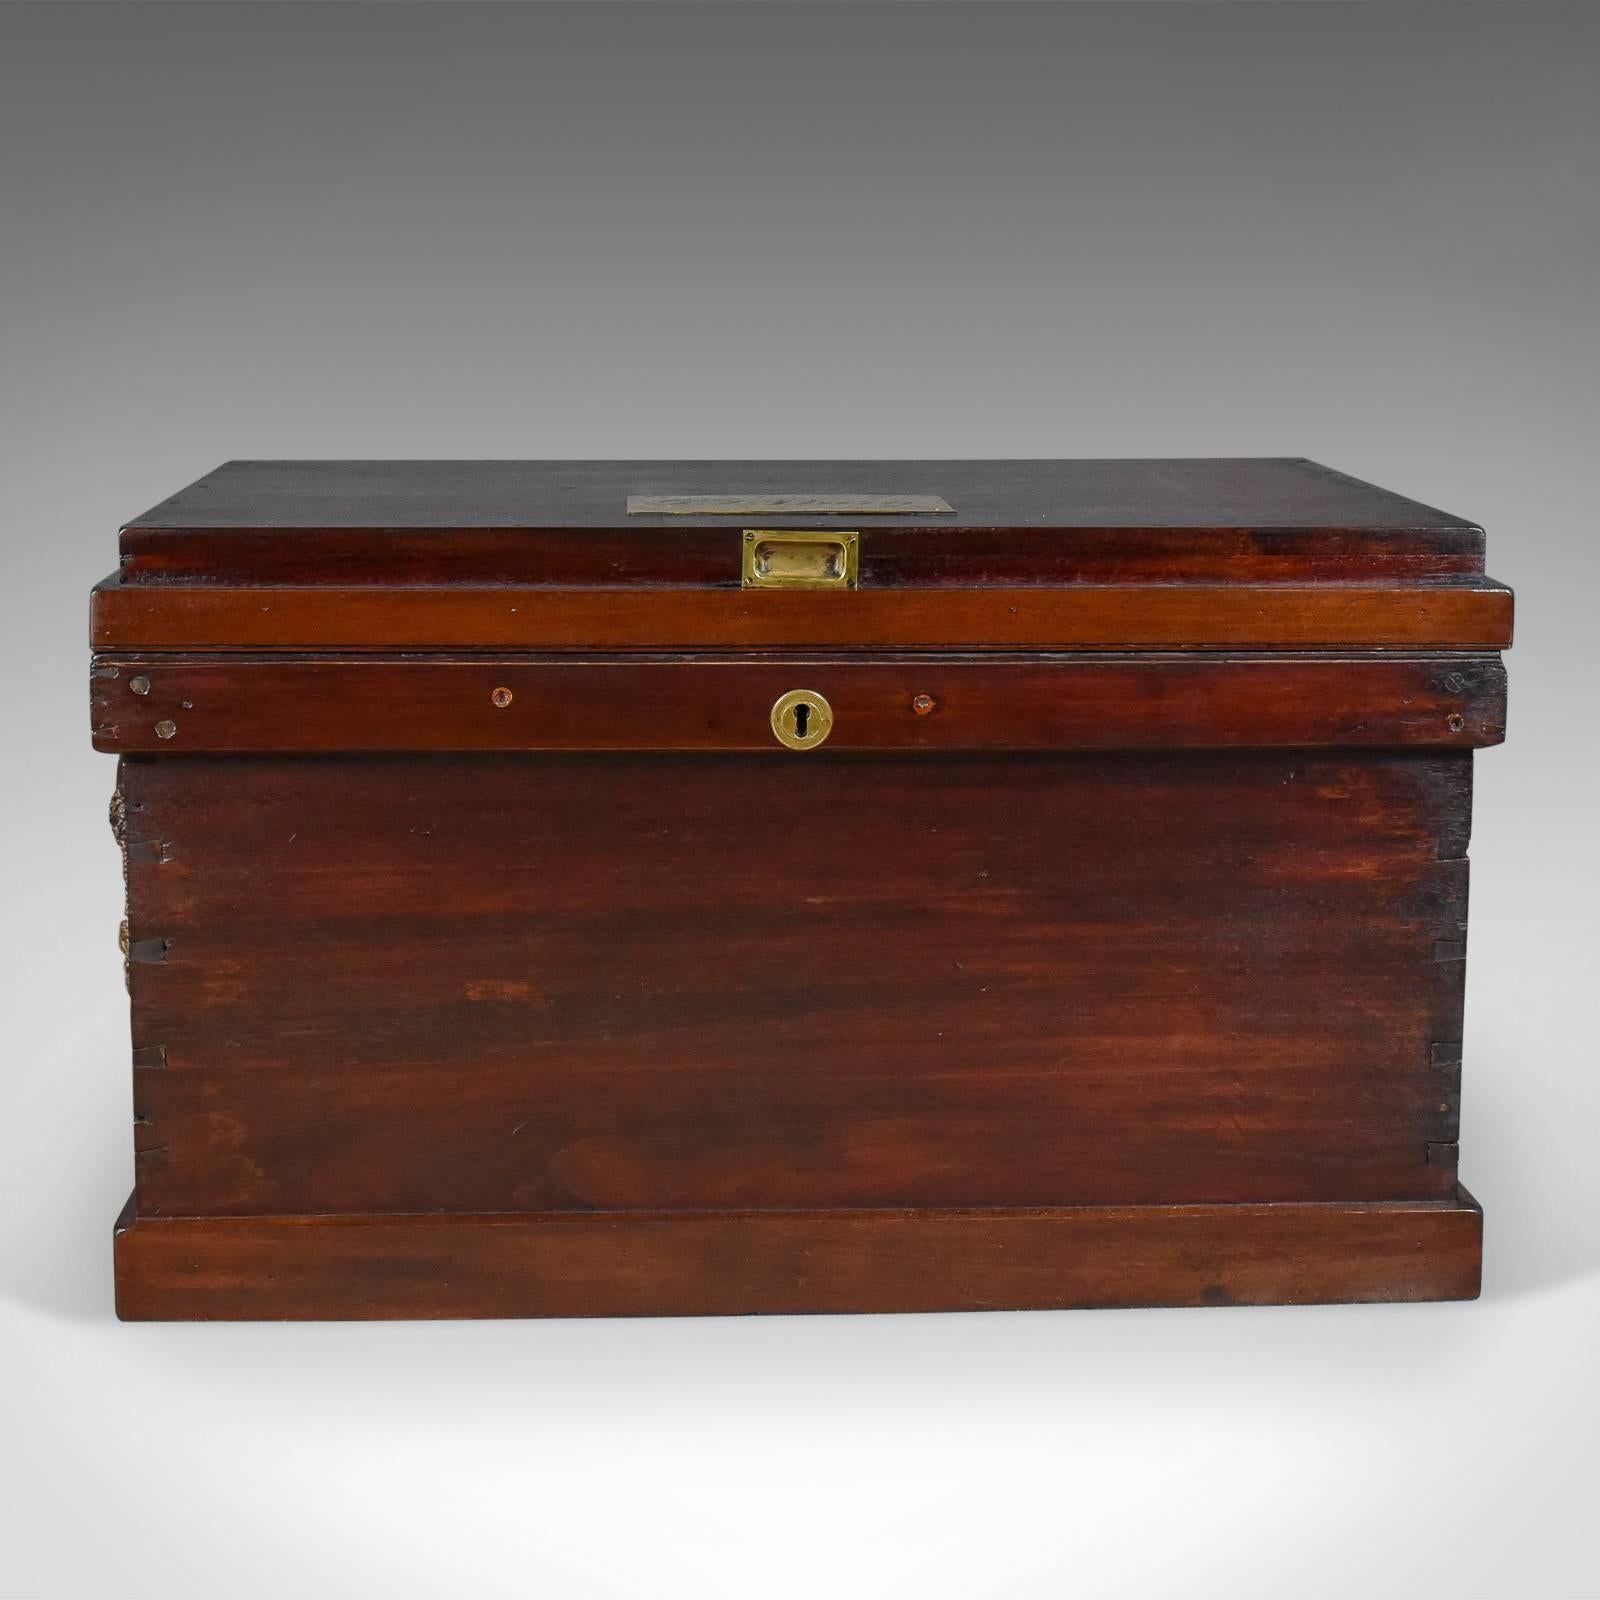 This is an antique, Royal Navy Officer's trunk. An early 19th century chest dating to circa 1800.

Superb historic piece with tremendous naval interest
Carrying the name plate of one G.J. Pearn R.N.
Quality craftsmanship in solid mahogany with